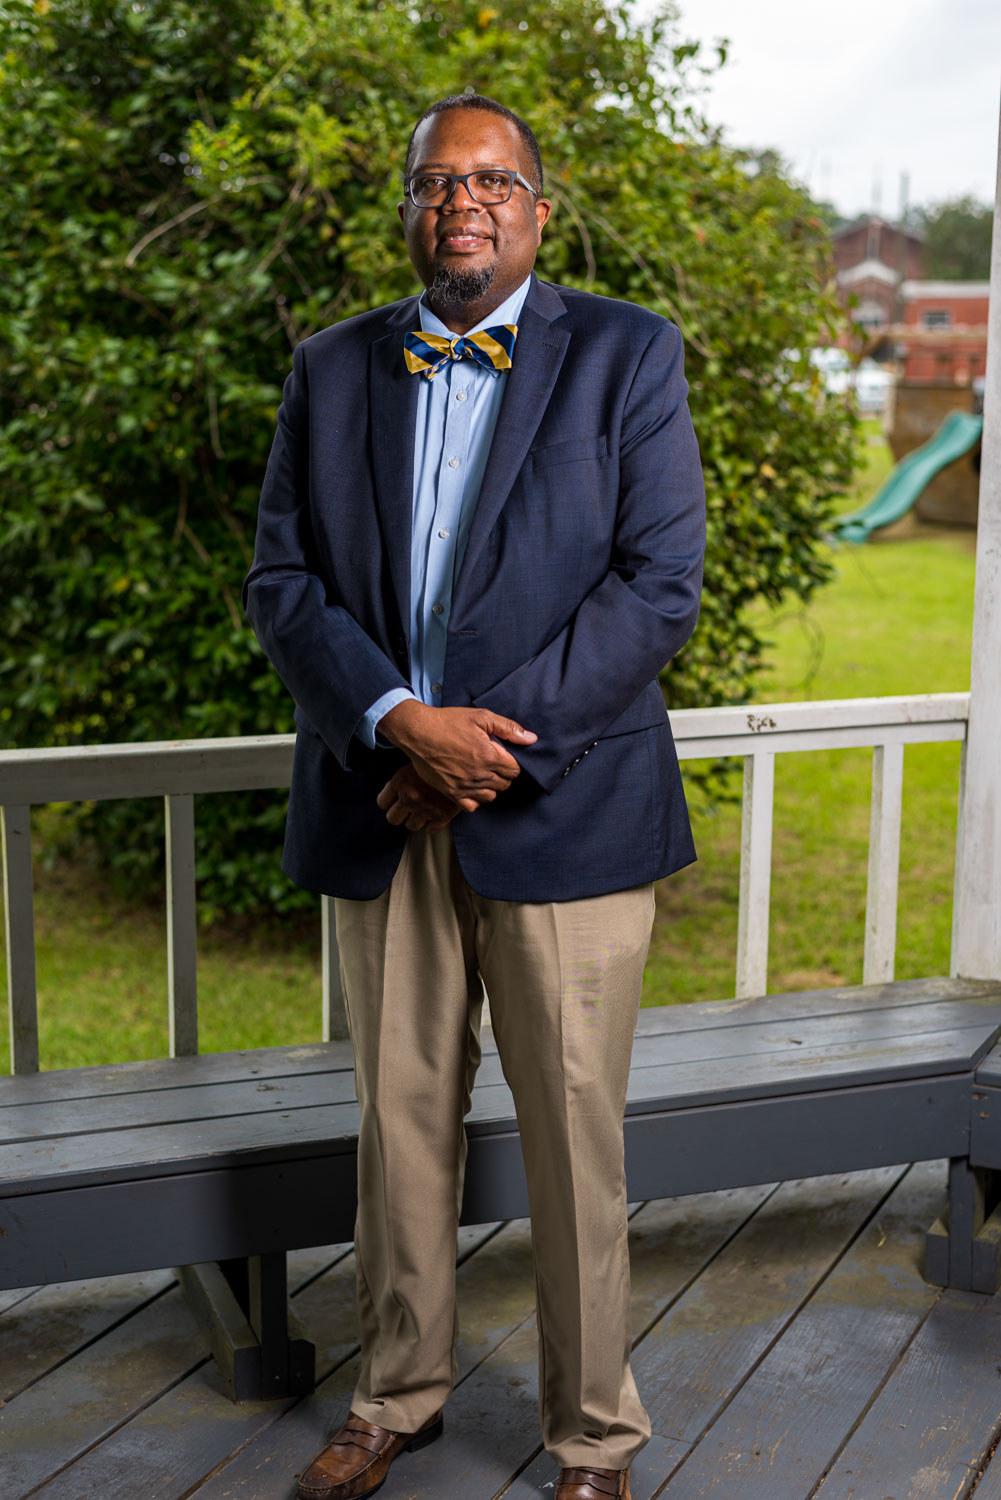 A Black man with glasses wearing a blue and yellow striped tie, a blue dress jacket, and khakis, standing on a deck in front of a tree.